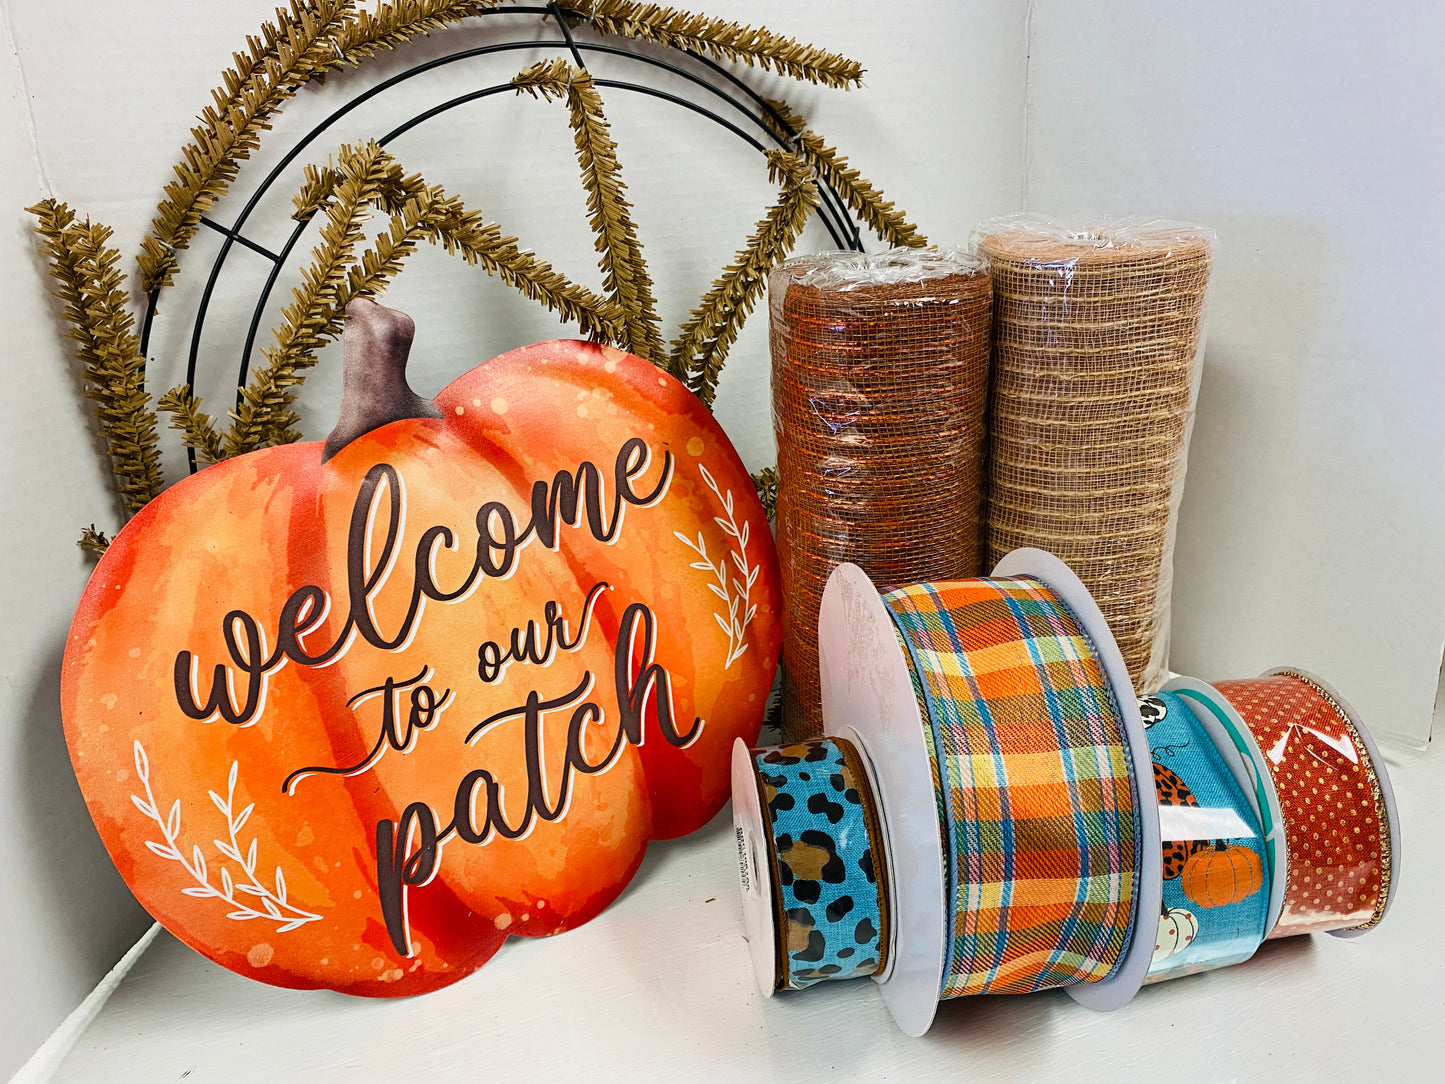 Welcome to Our Patch Wreath Kit